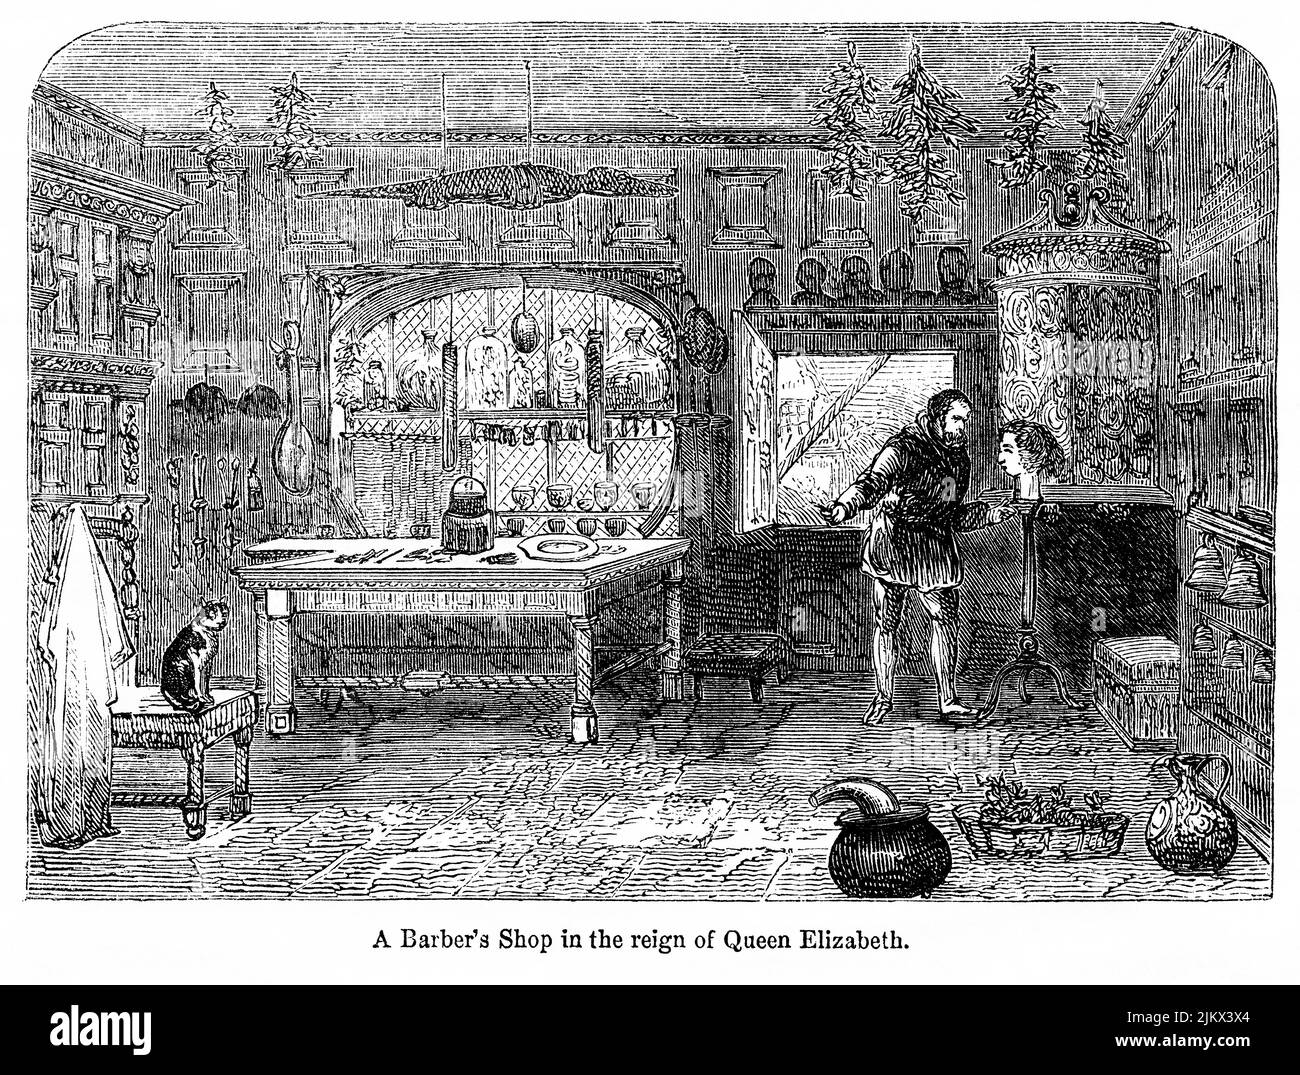 A Barber’s Shop in the reign of Queen Elizabeth, Illustration from the Book, 'John Cassel’s Illustrated History of England, Volume II', text by William Howitt, Cassell, Petter, and Galpin, London, 1858 Stock Photo